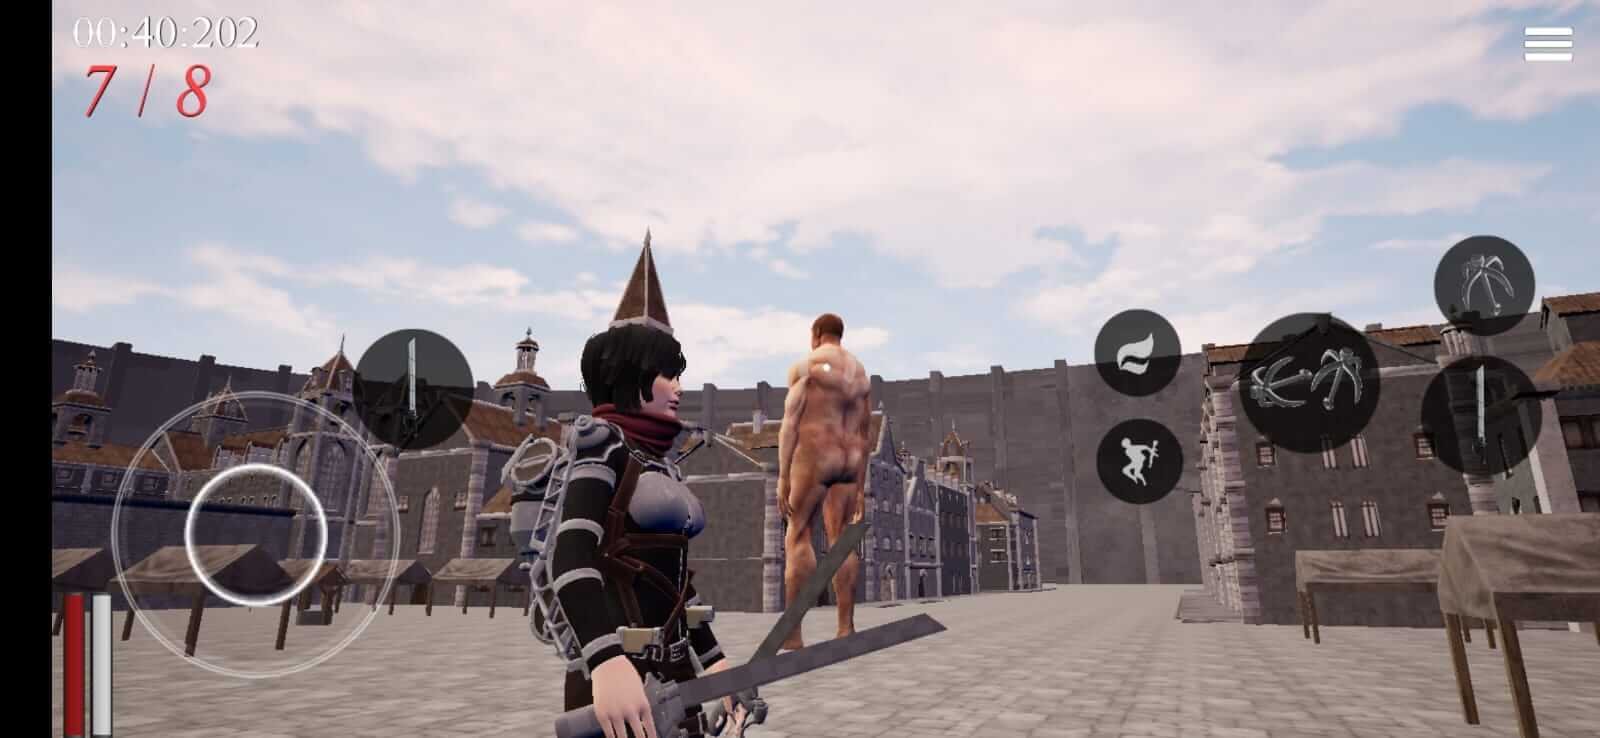 Download Attack on Titan APK 1.1.2.12 for Android 